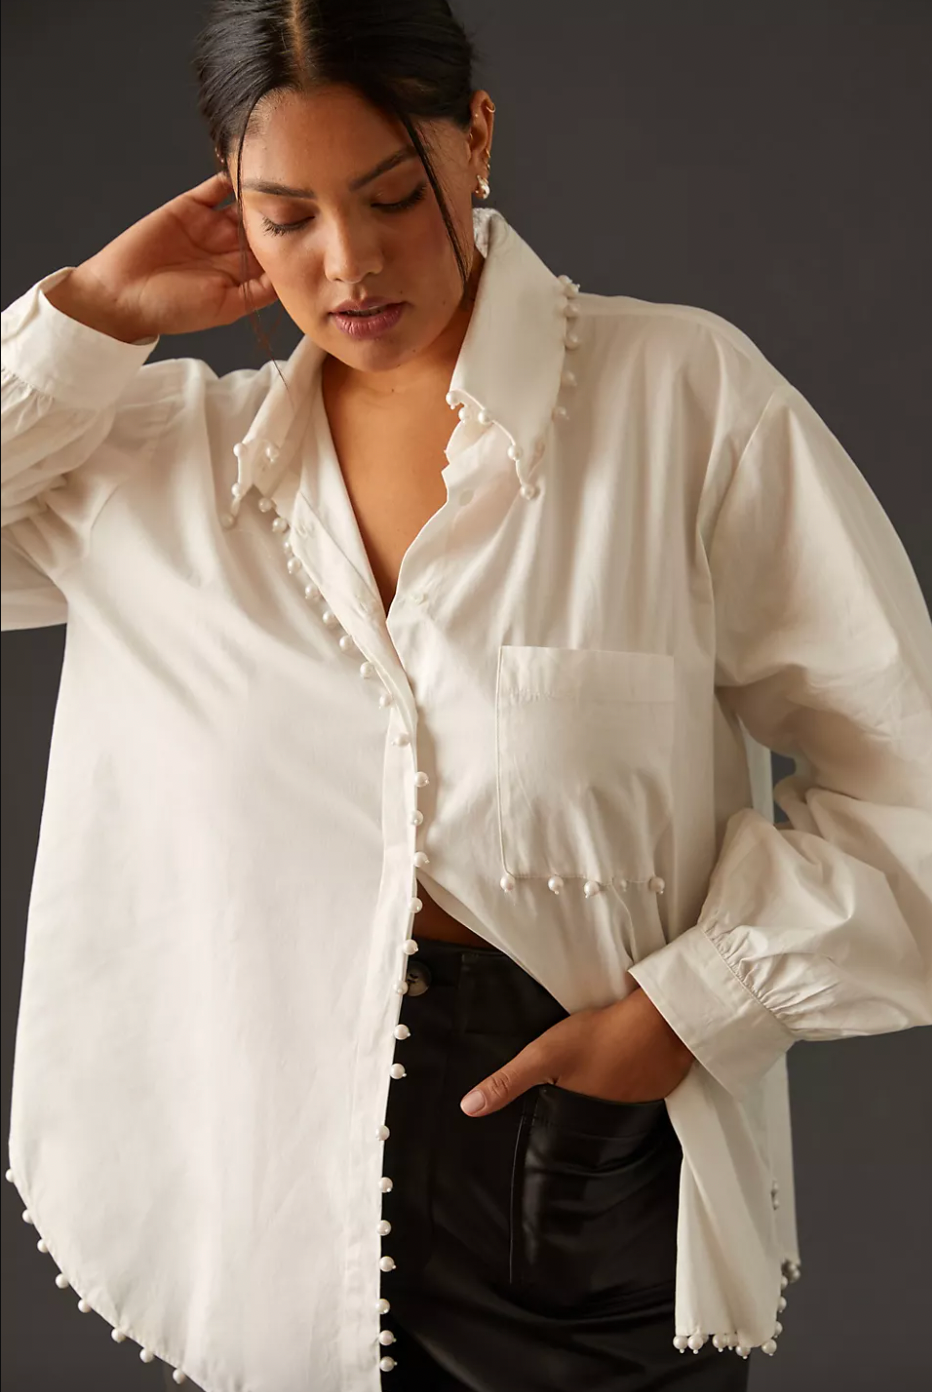 6 Ways To Wear A White Button-Down Shirt - Classy Yet Trendy